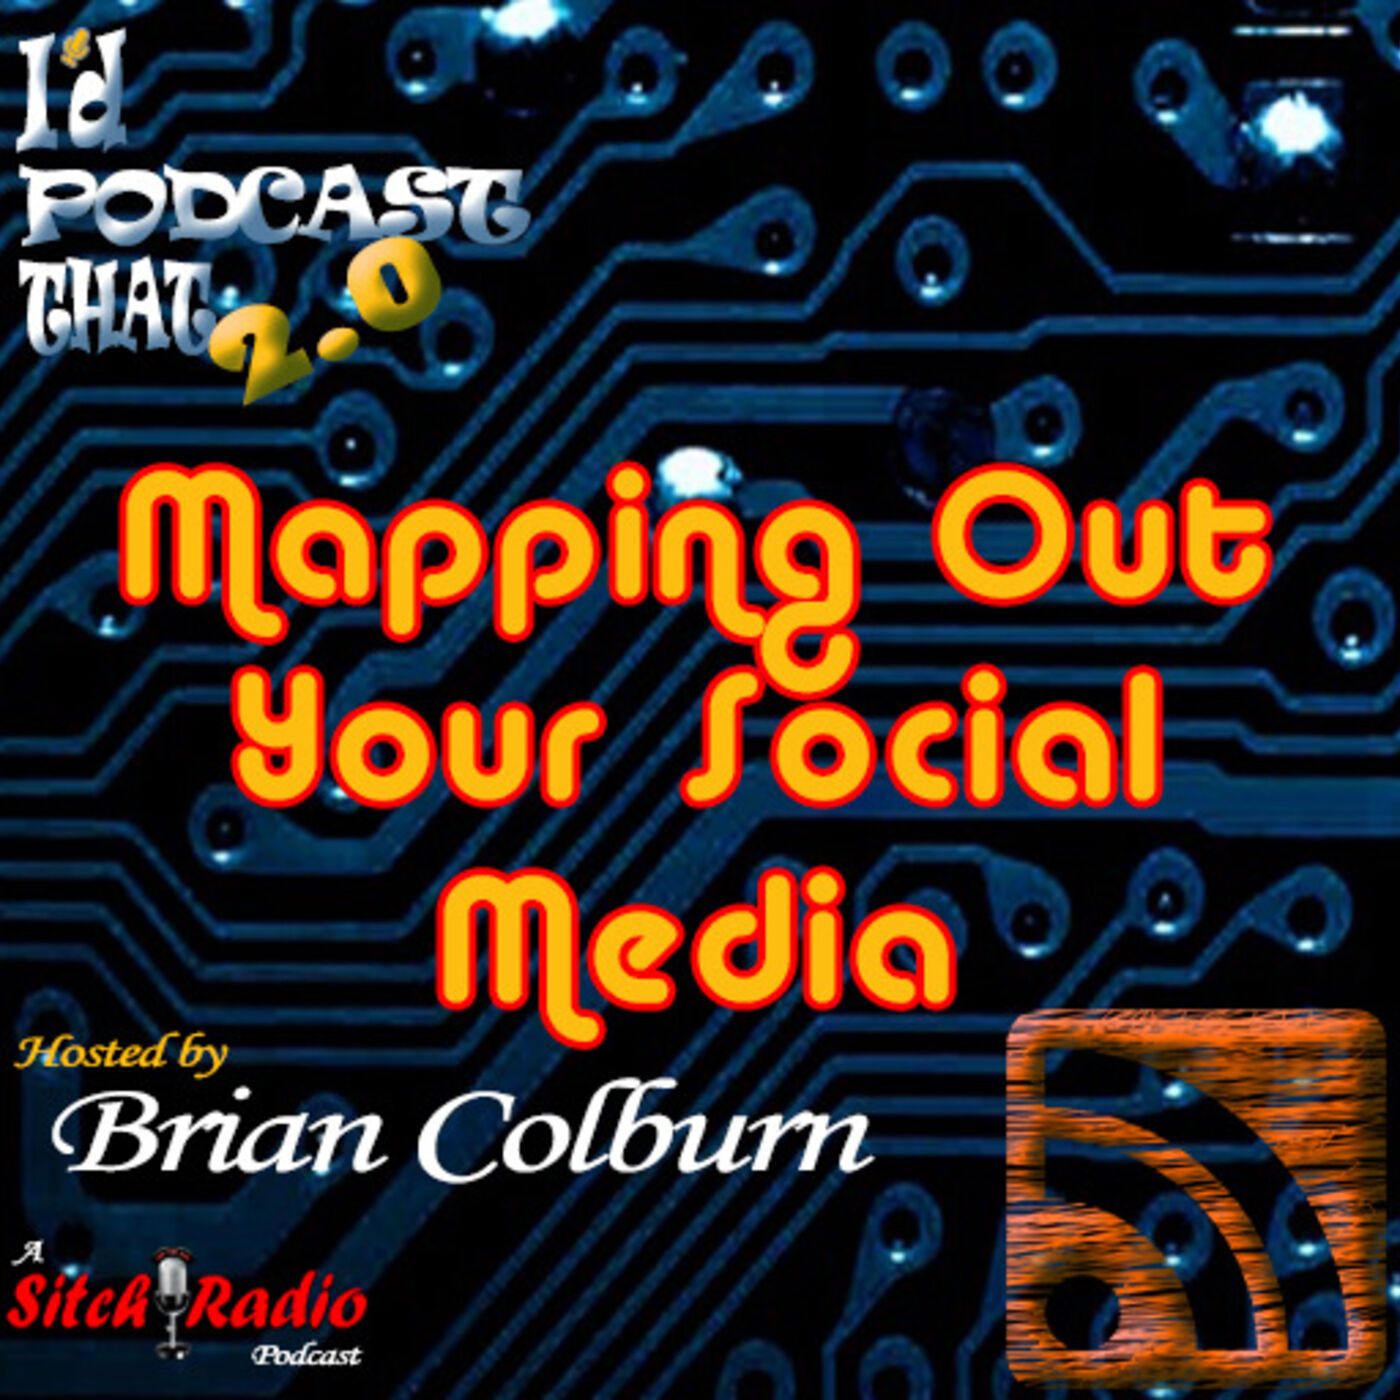 Mapping Out Your Social Media